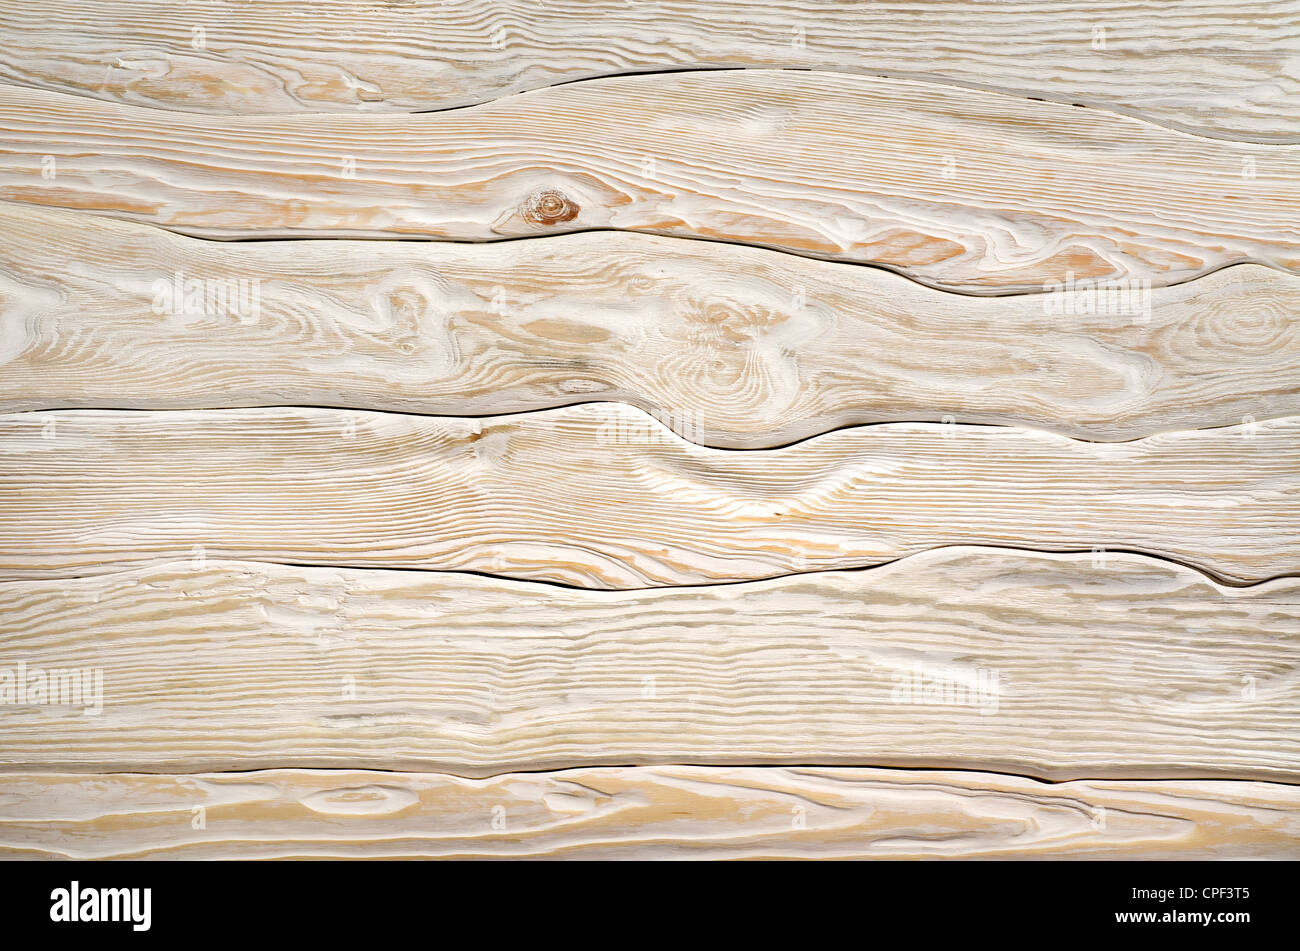 Old light wooden board of a painted white color Stock Photo